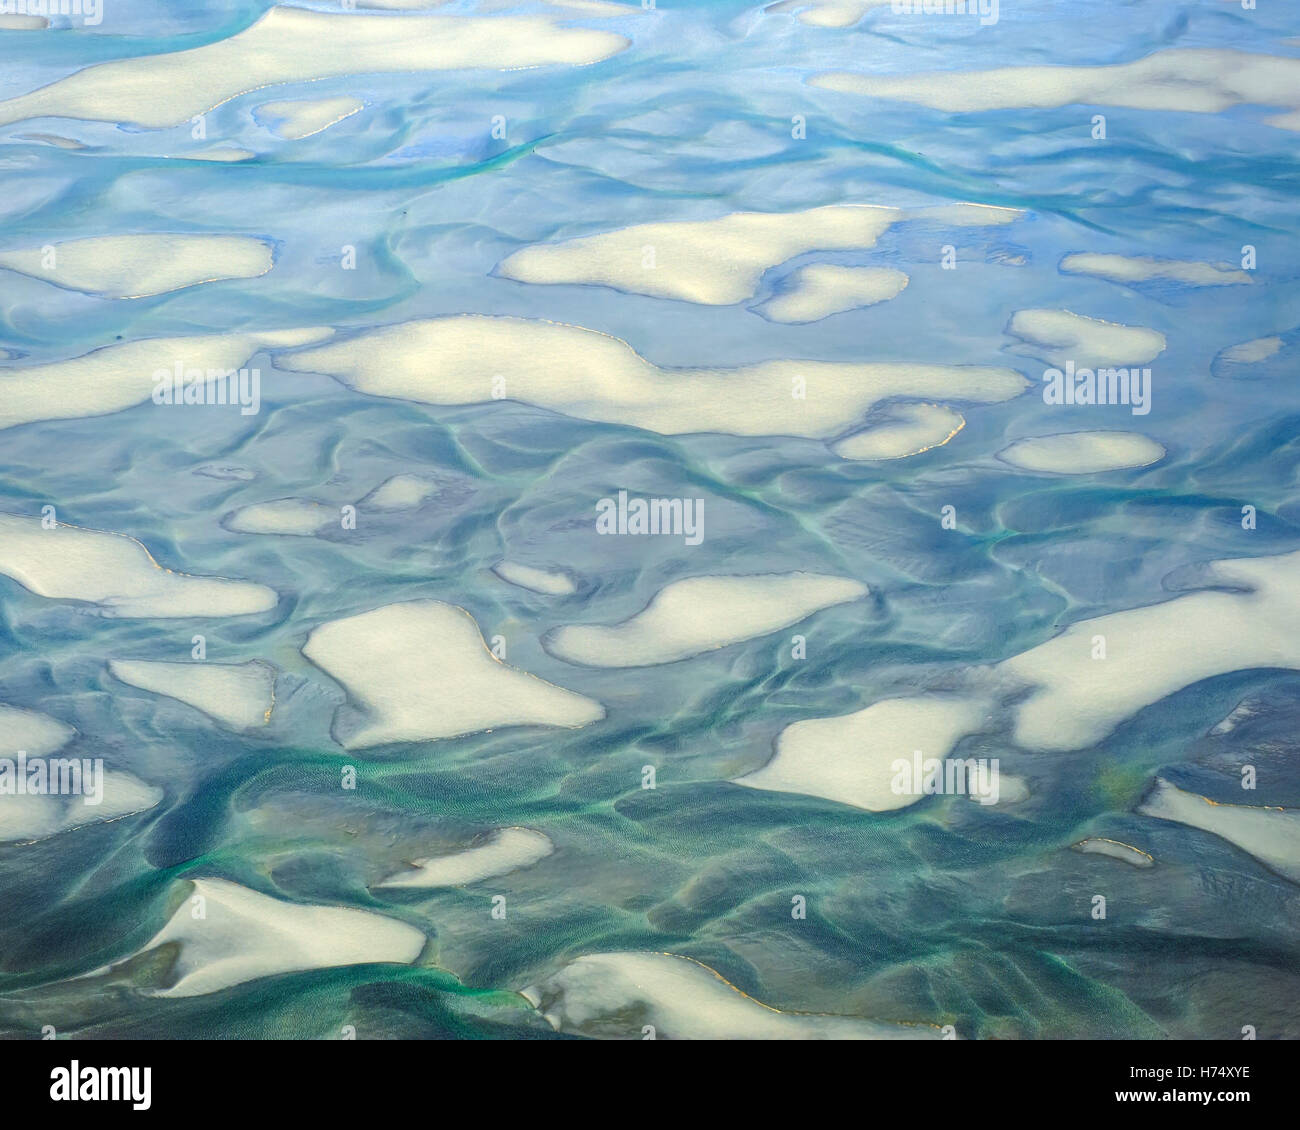 Sand bars from the air in Haines, Alaska. Stock Photo